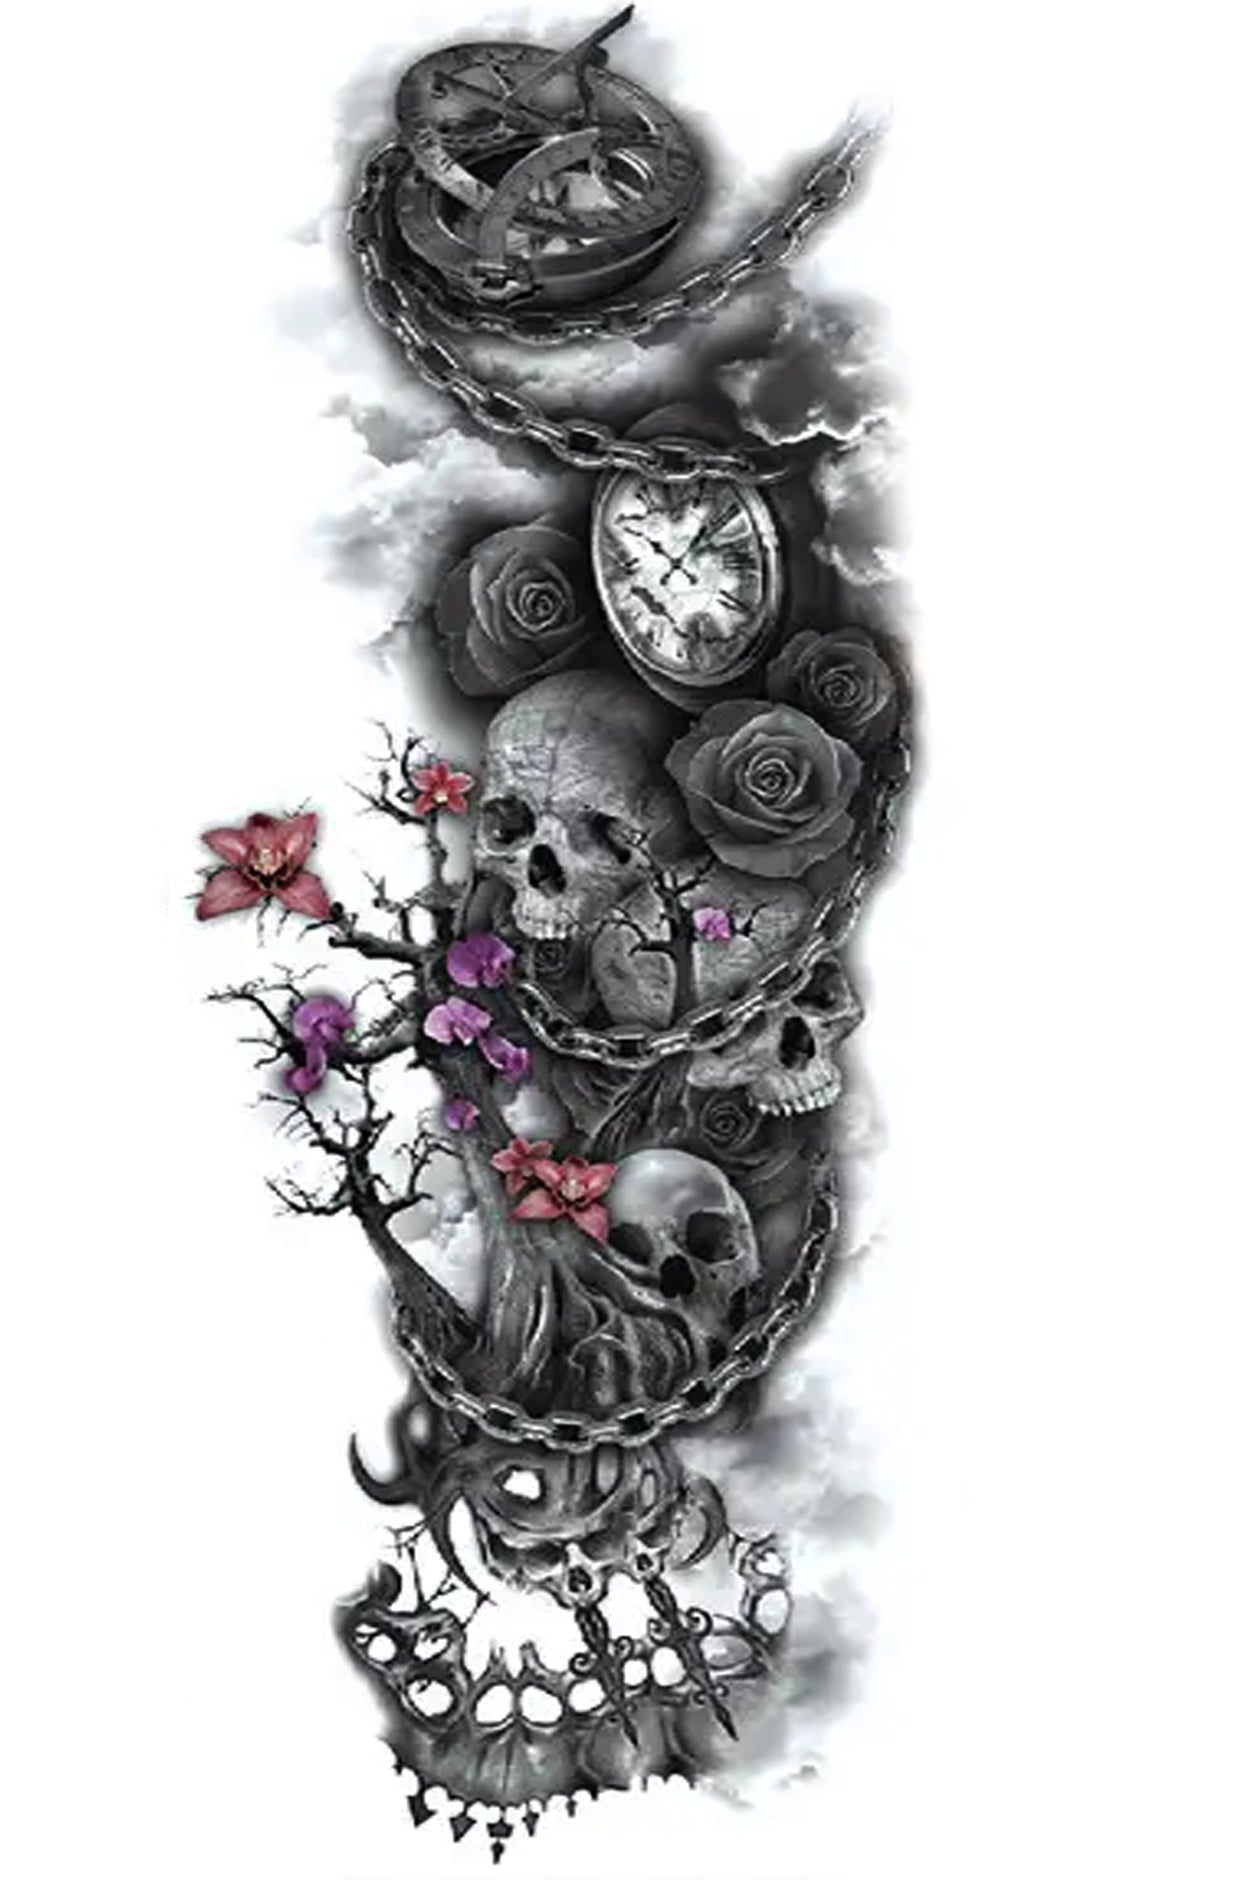 Intertwined with the Tree of Life are three skulls bound and supported by a chain. Clocks and roses add the symbolization that love and life are fleeting. The artwork is tied together with misty clouds and a few pink orchids that represent everlasting love. Enjoy this poignant artwork from wrist to shoulder, leg, or back.